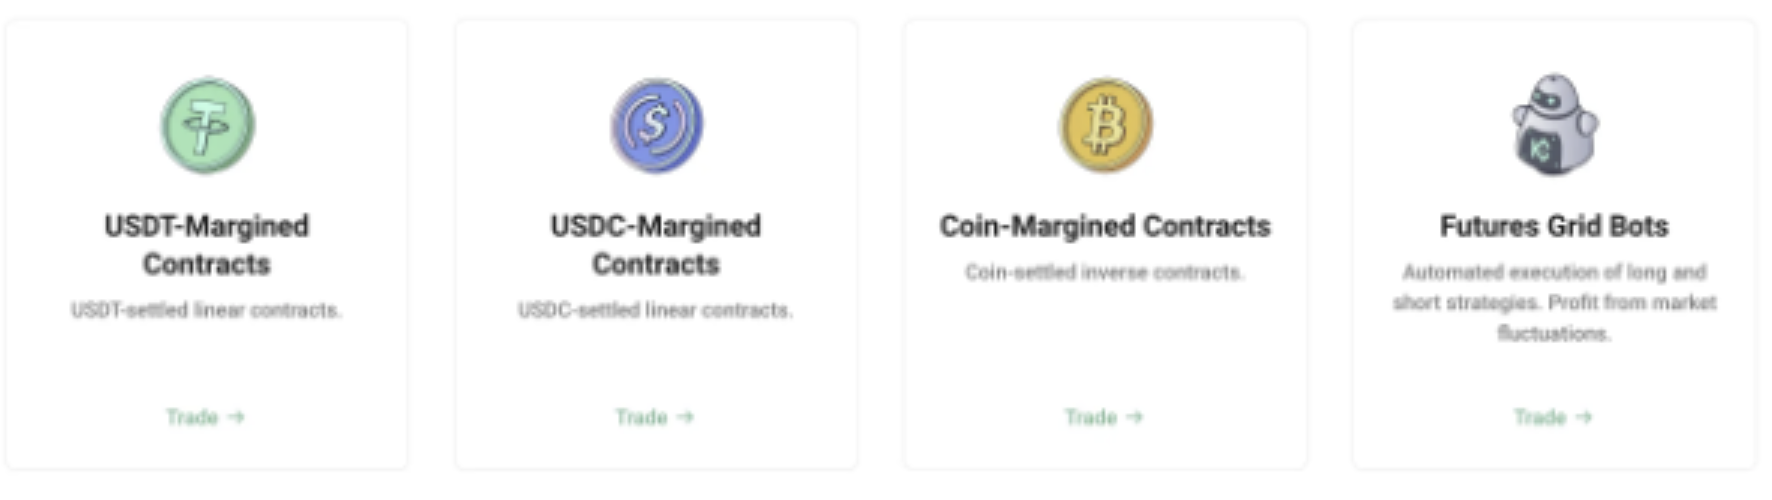 Kucoin futures products